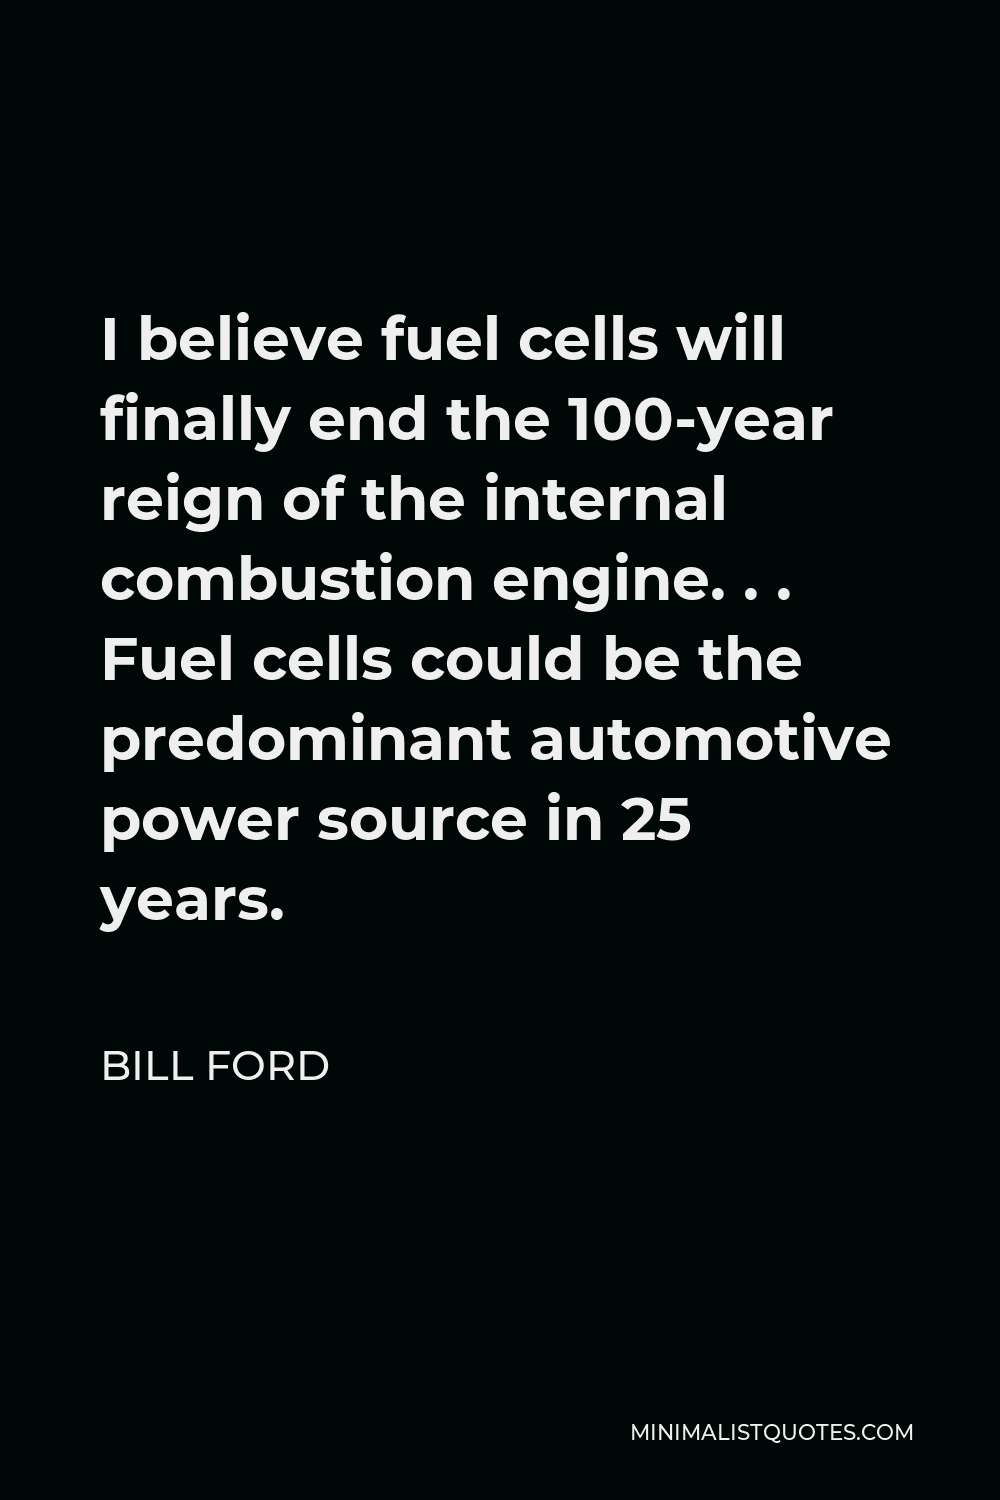 Bill Ford Quote - I believe fuel cells will finally end the 100-year reign of the internal combustion engine. . . Fuel cells could be the predominant automotive power source in 25 years.